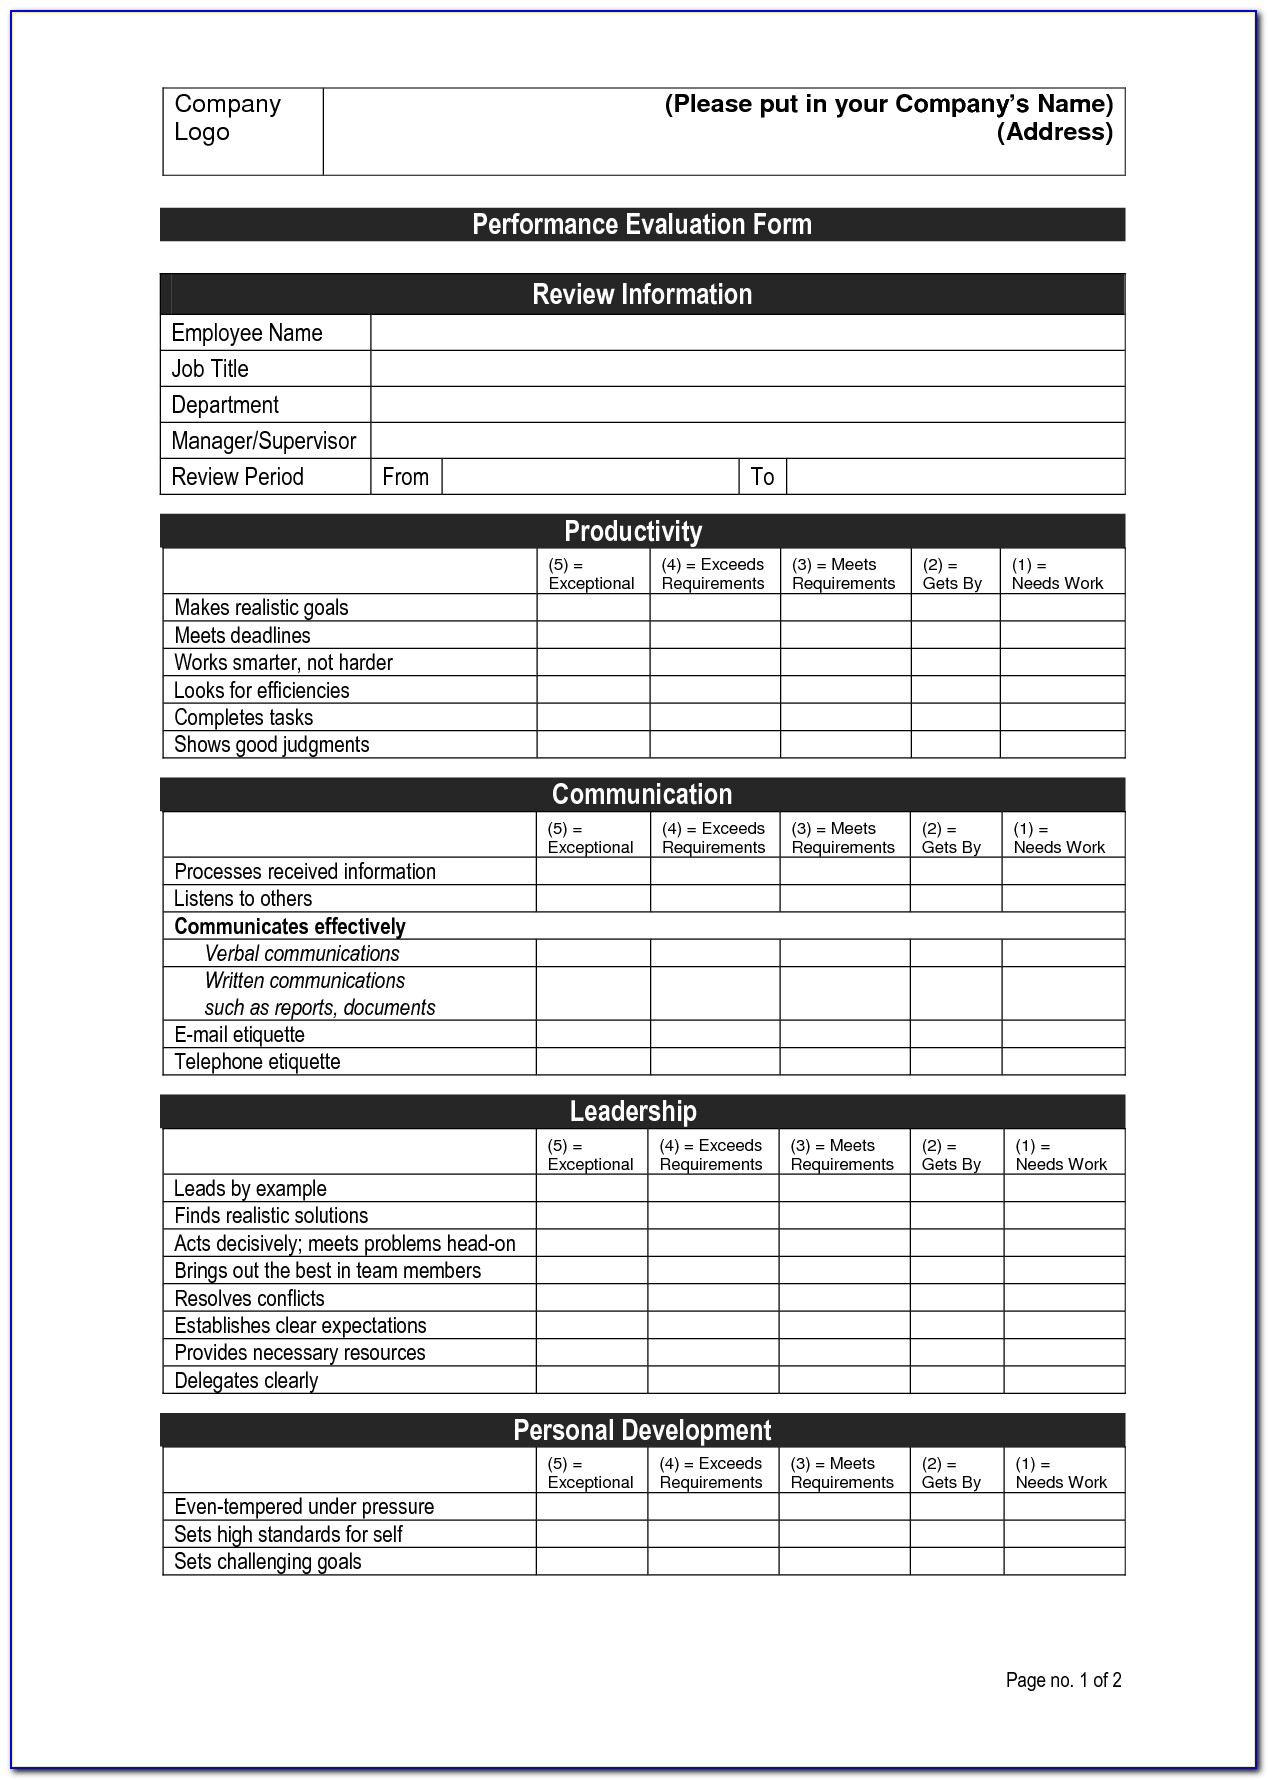 Employee Performance Appraisal Form Example